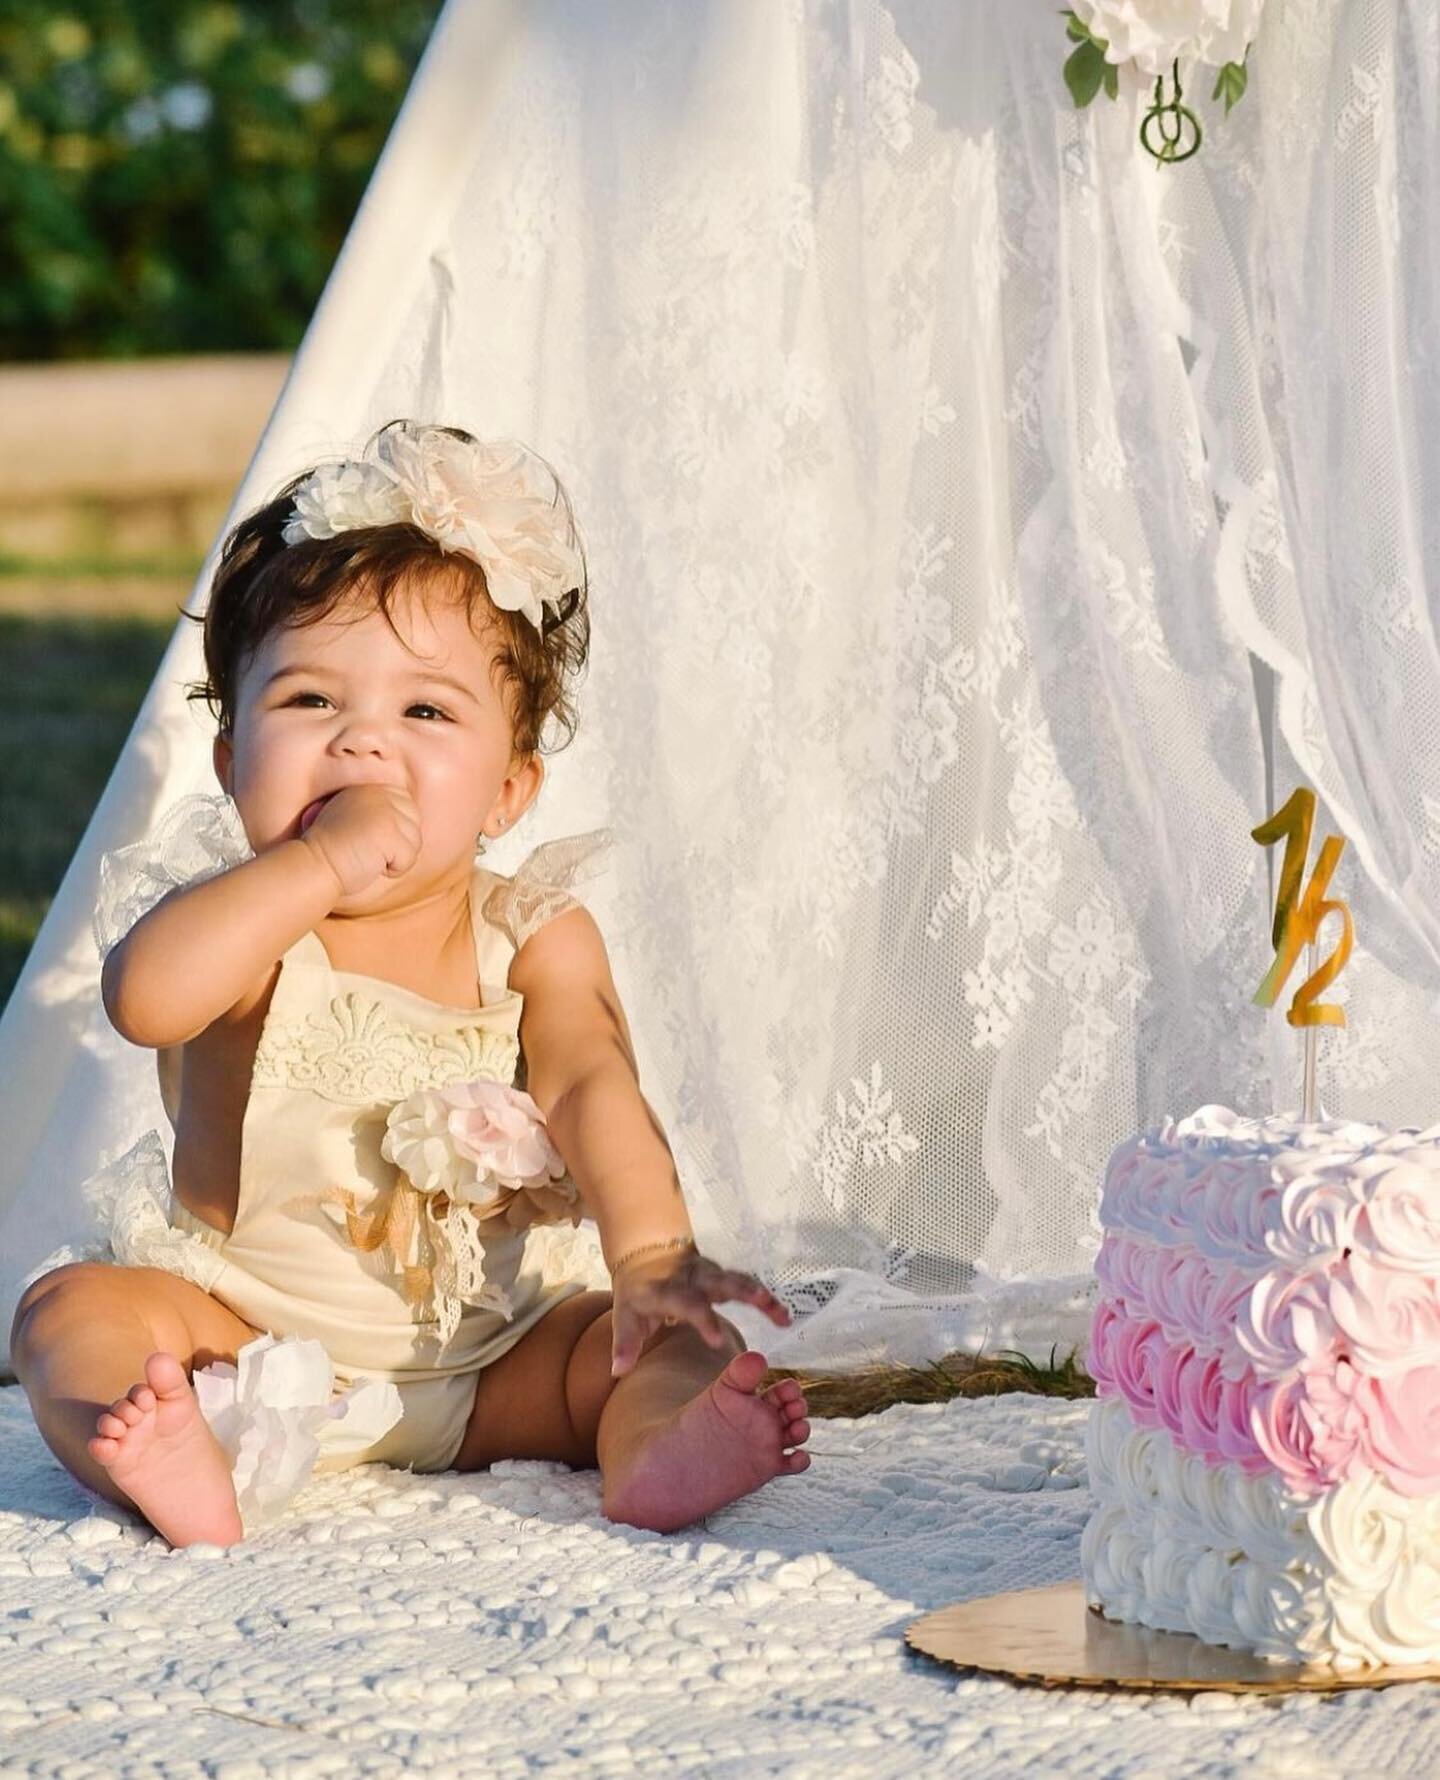 Swipe to see this gorgeous baby destroying this cake and enjoying her 6 month picnic 🤩💕➡️

Book your photoshoot and picnic with us 📸🧺

#boston #seaport #bostoncommon #castleisland #carsonbeach #cambridge #northshore #capecod #picnicboston #bachel